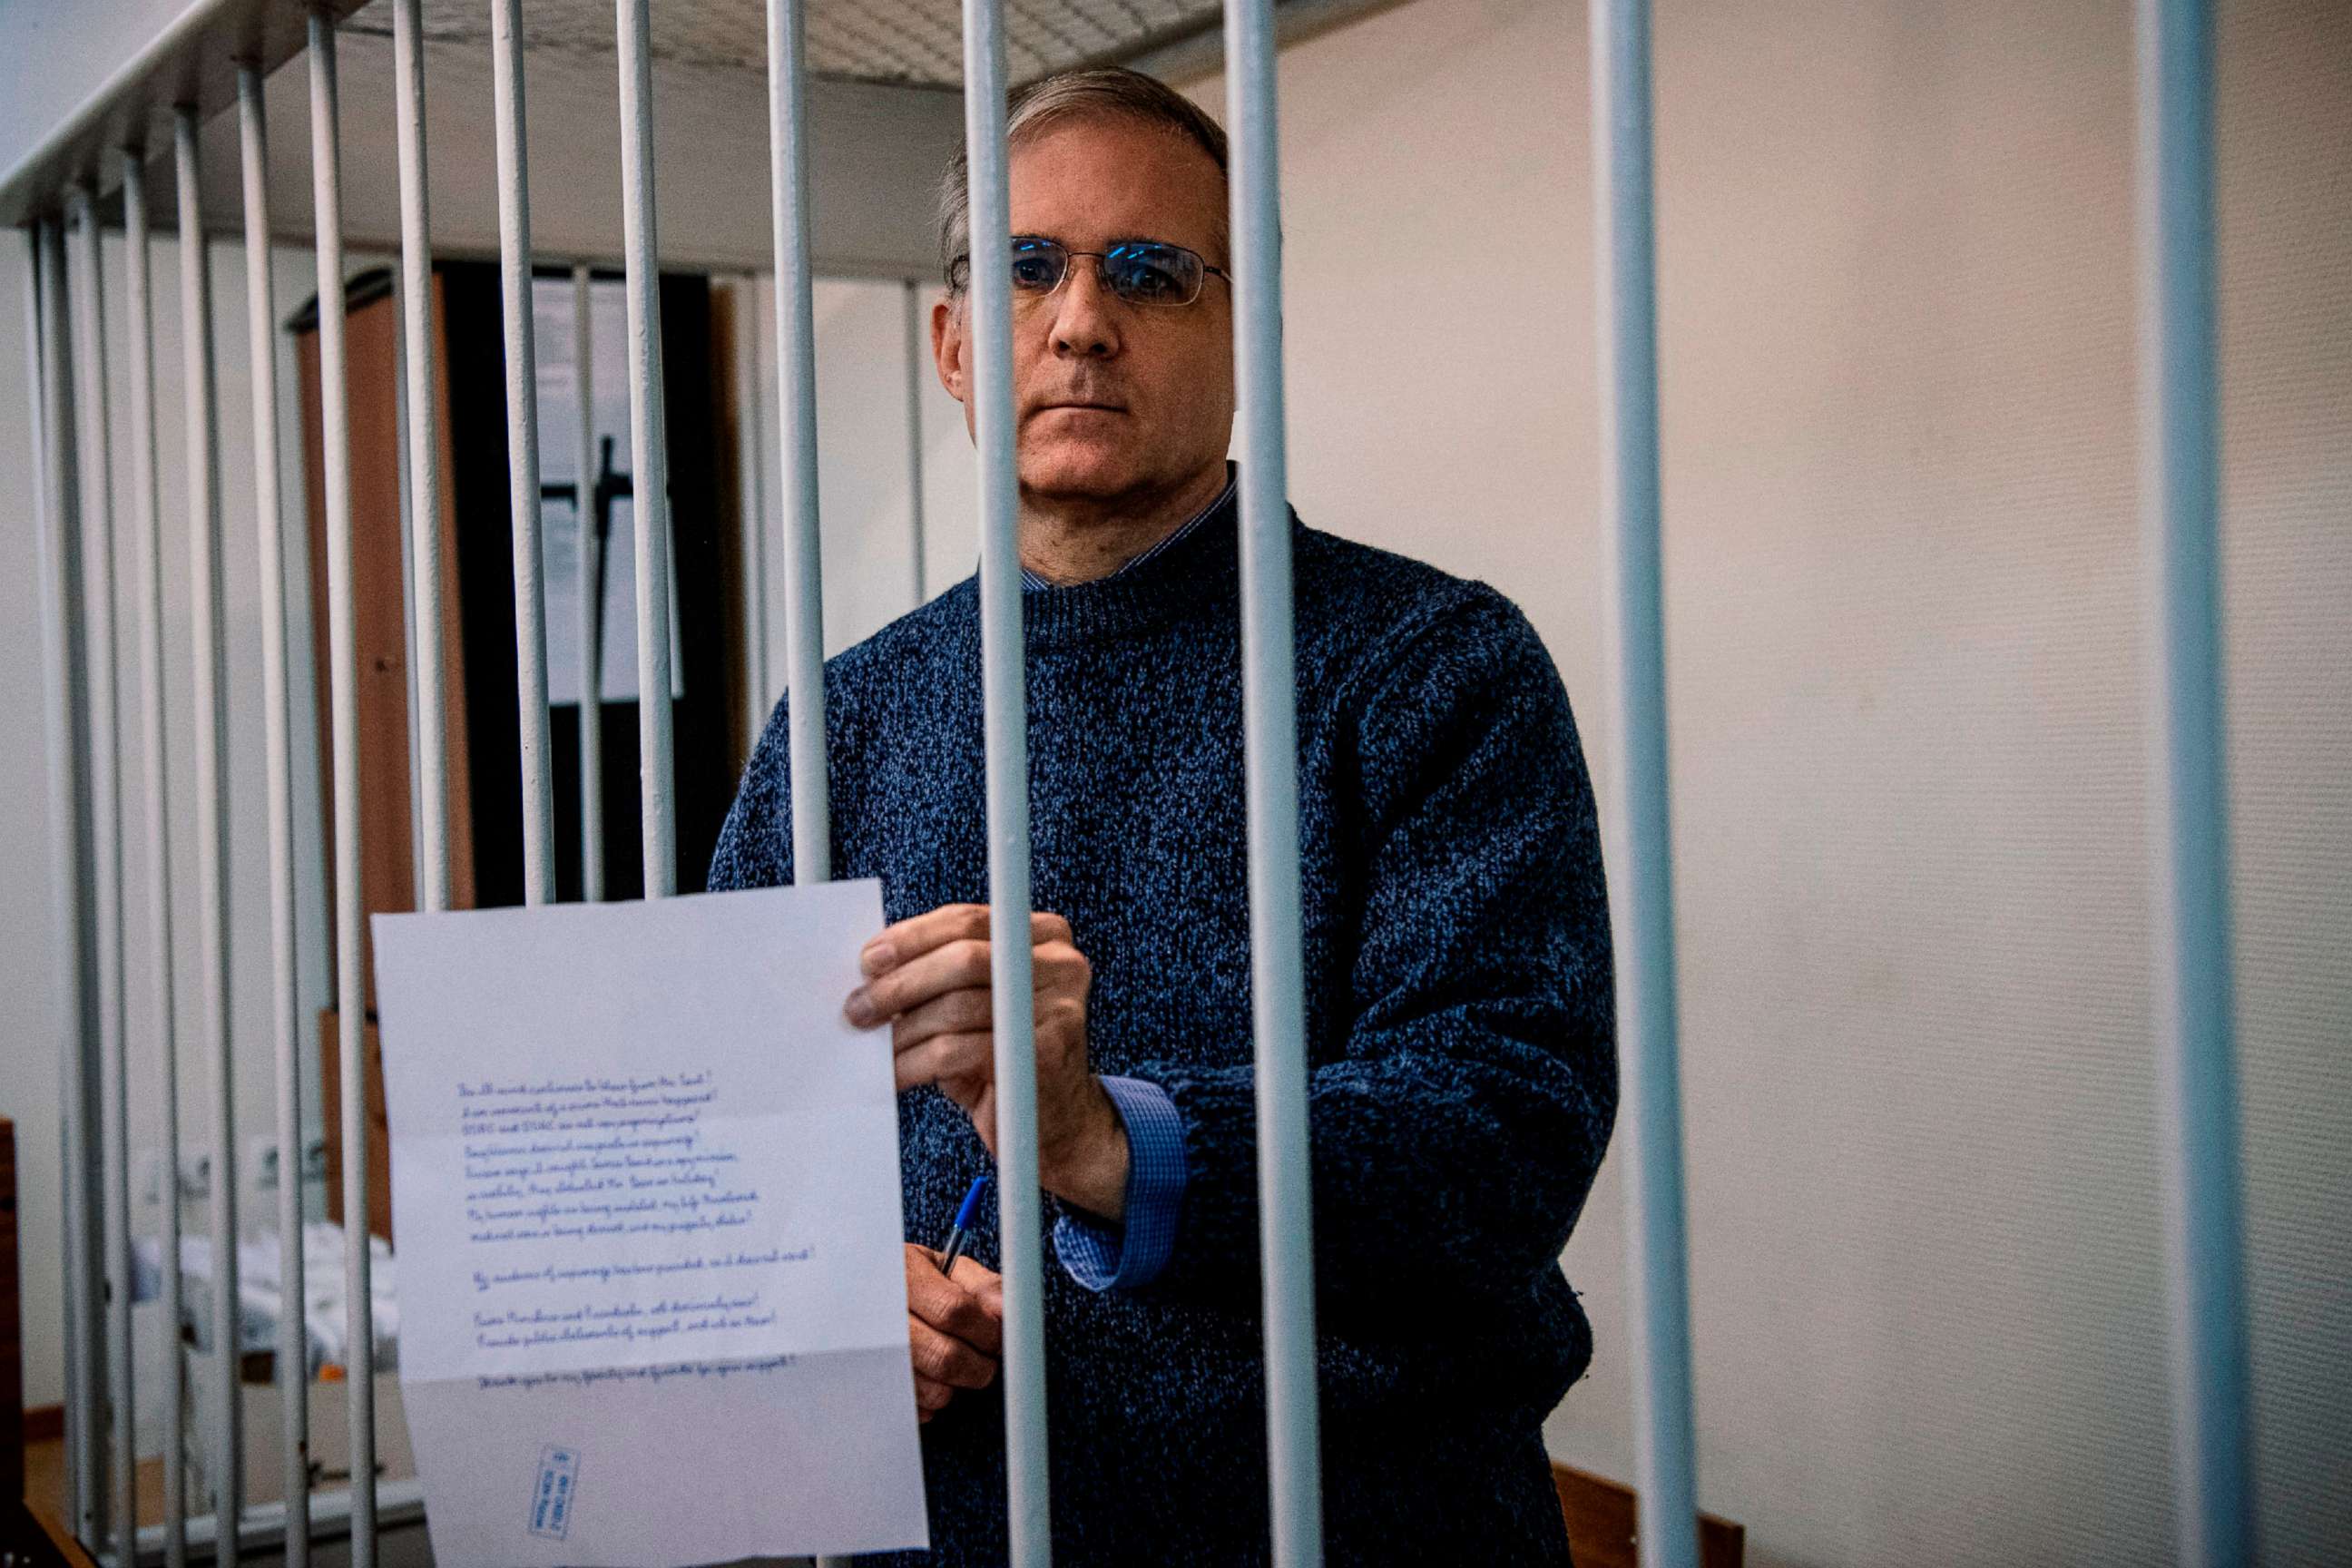 PHOTO: Paul Whelan, a former U.S. Marine accused of espionage and arrested in Russia in Dec. 2018, holds a message as he stands inside a defendants' cage before a hearing to decide to extend his detention at the Lefortovo Court in Moscow on Oct. 24, 2019.